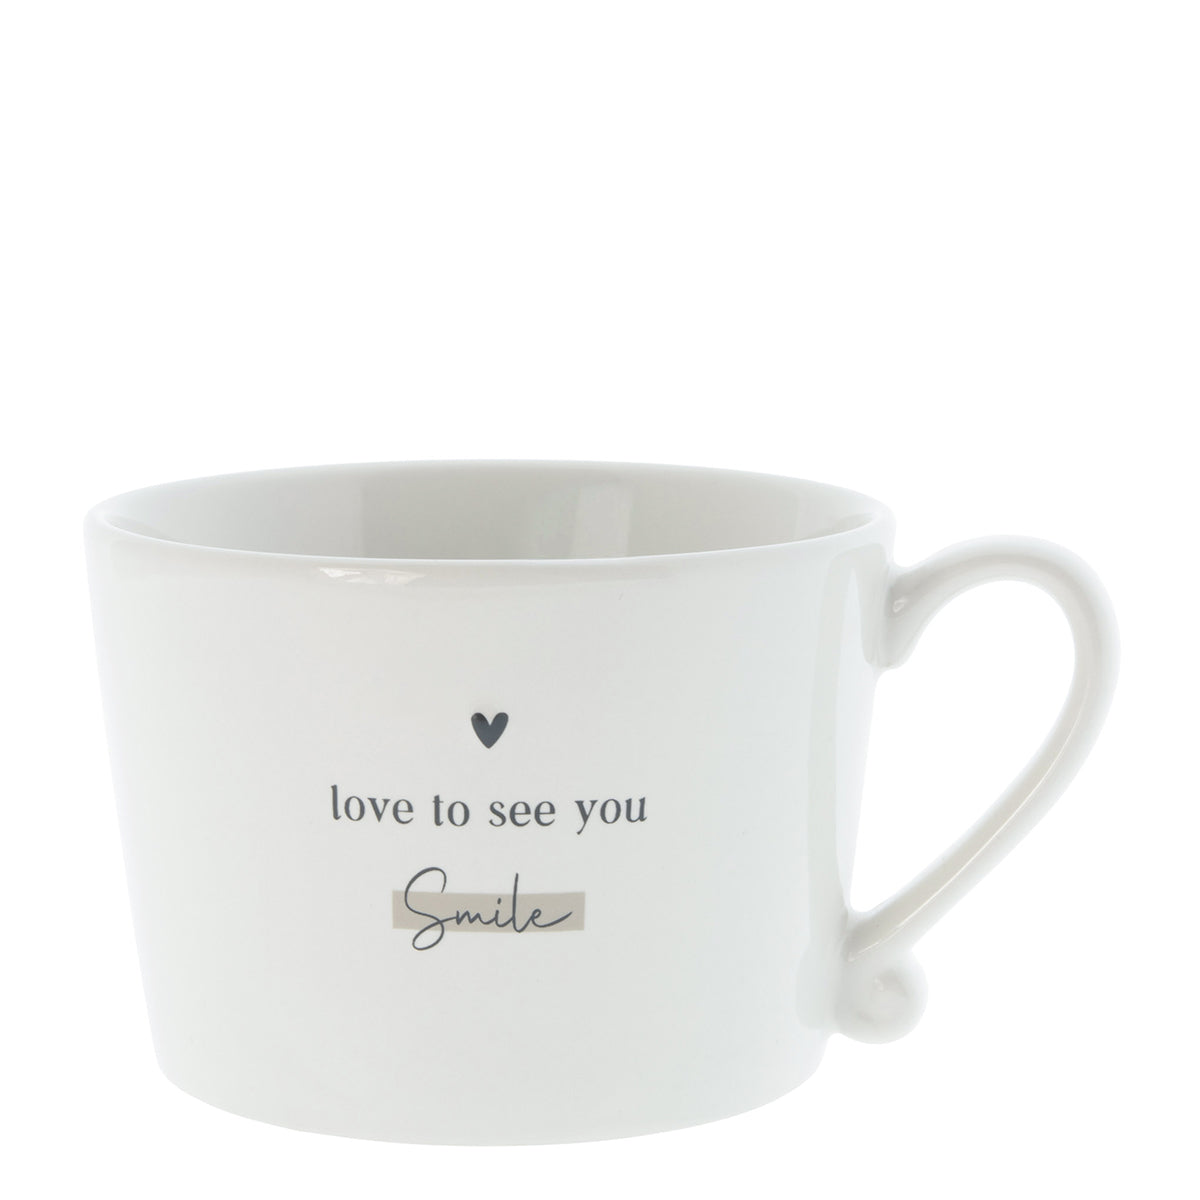 Bastion Collections Tasse "Love to see you smile"